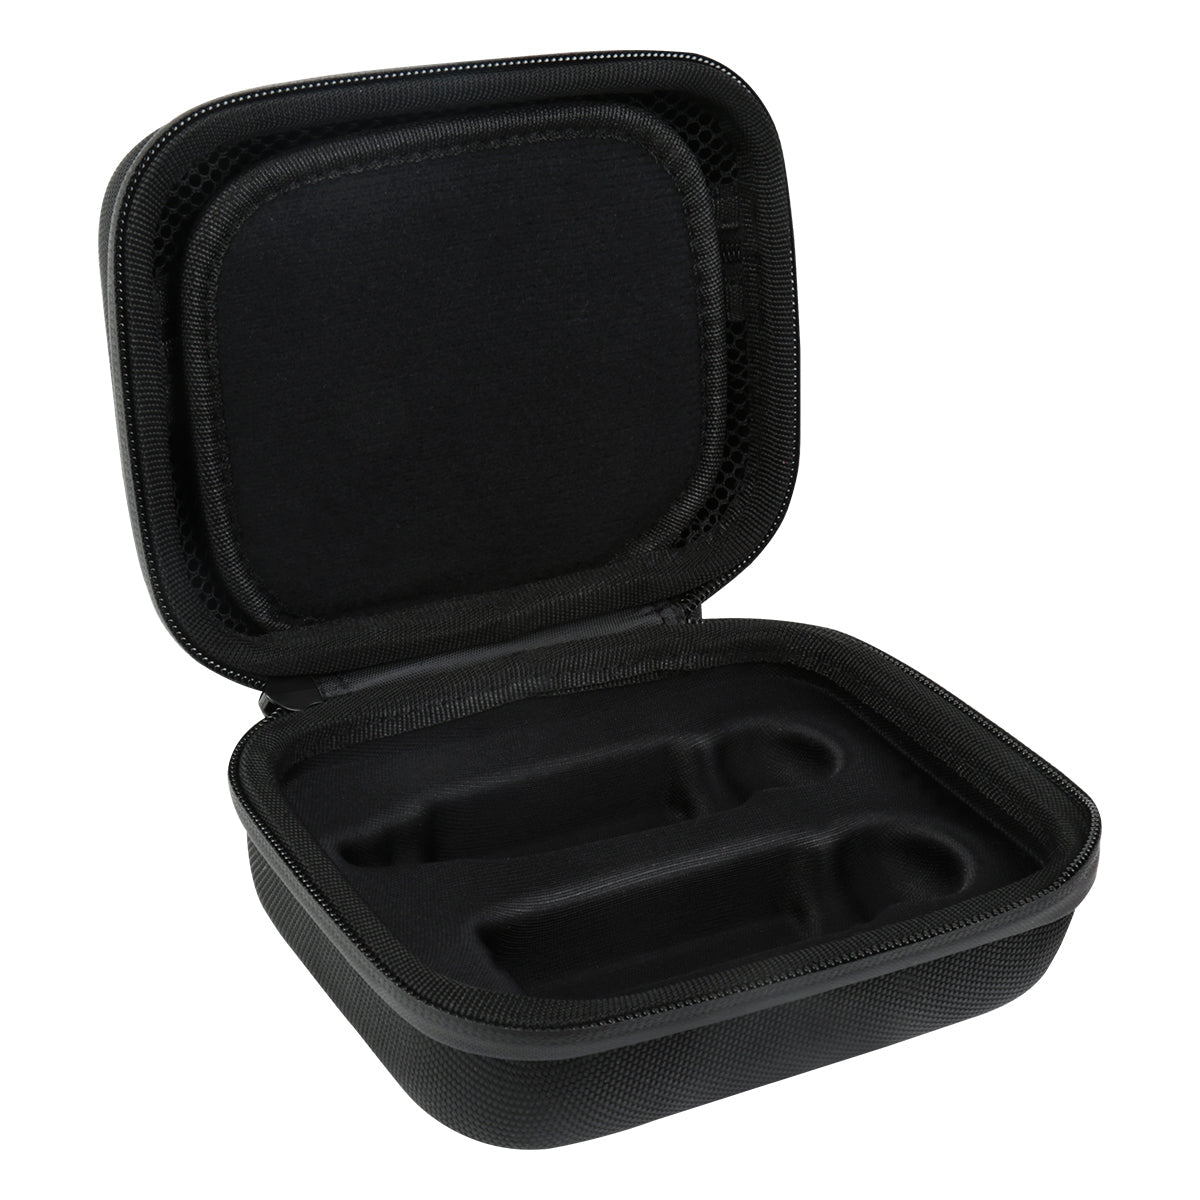 Xvive Travel Case for U3 / U3C Microphone Wireless System, Travel Case for sale at Richards Guitars.